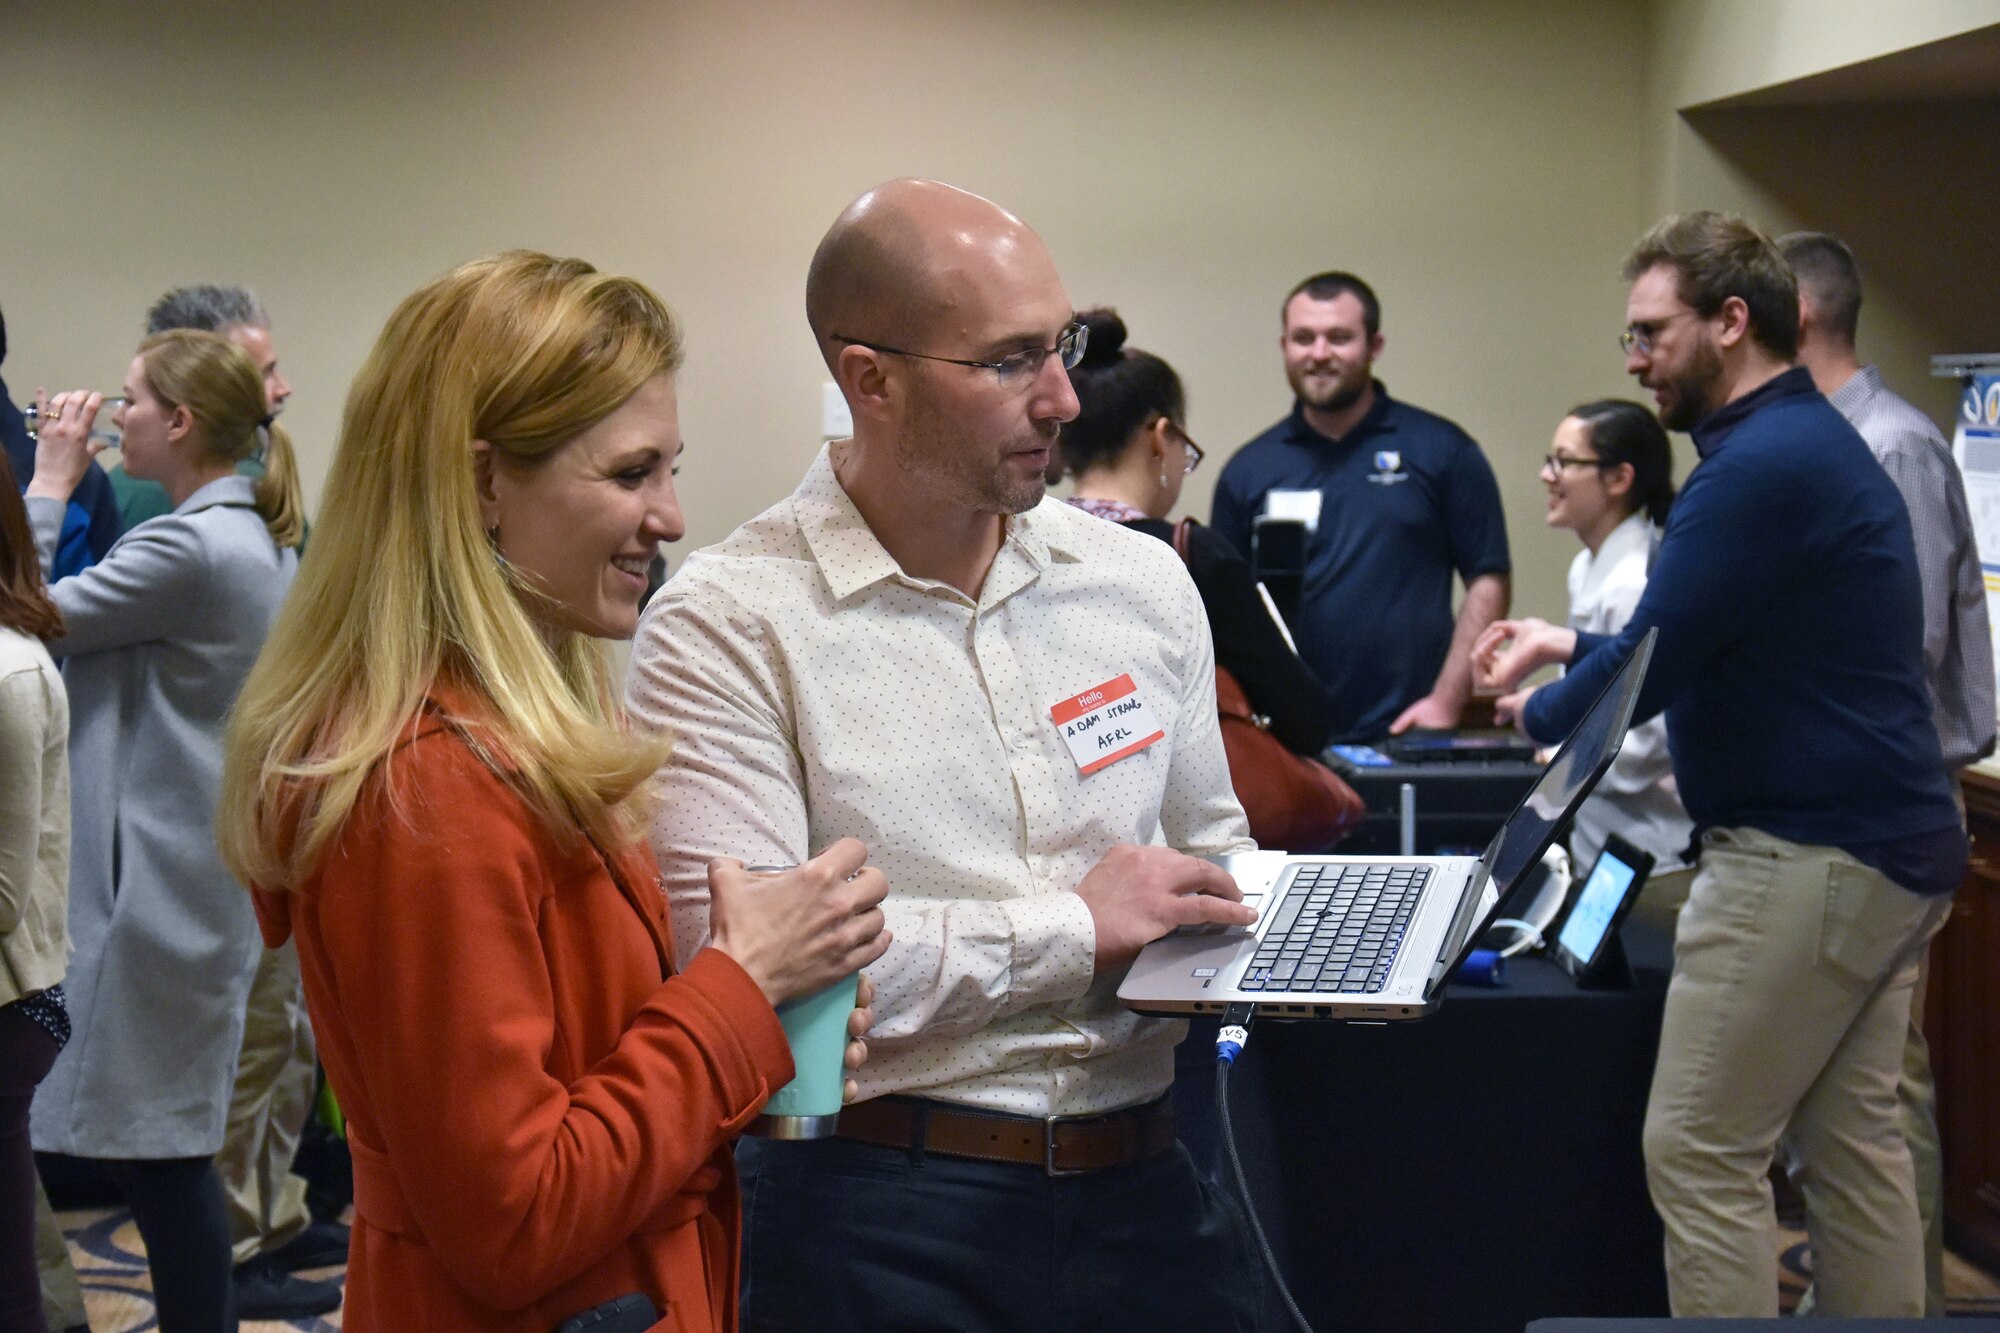 Dr. Adam Strang demonstrates Airman Data Analysis and Performance Tracking System to Dr. Jill McQuade, one of the Biotech Days organizers. Both are from the 711th Human Performance Wing. (U.S. Air Force photo/Spencer Deer)